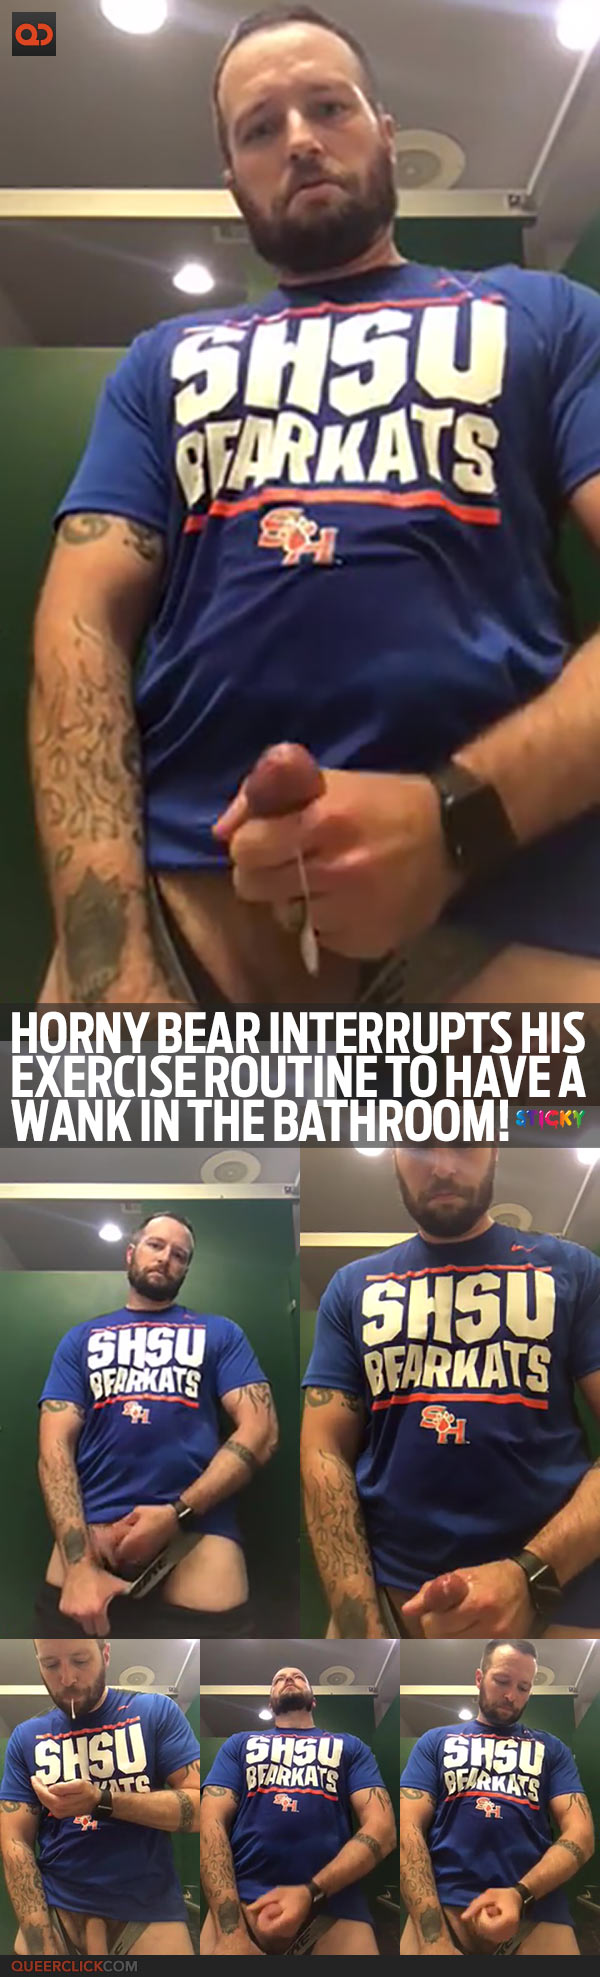 Horny Bear Interrupts His Exercise Routine To Have A Wank In The Bathroom!